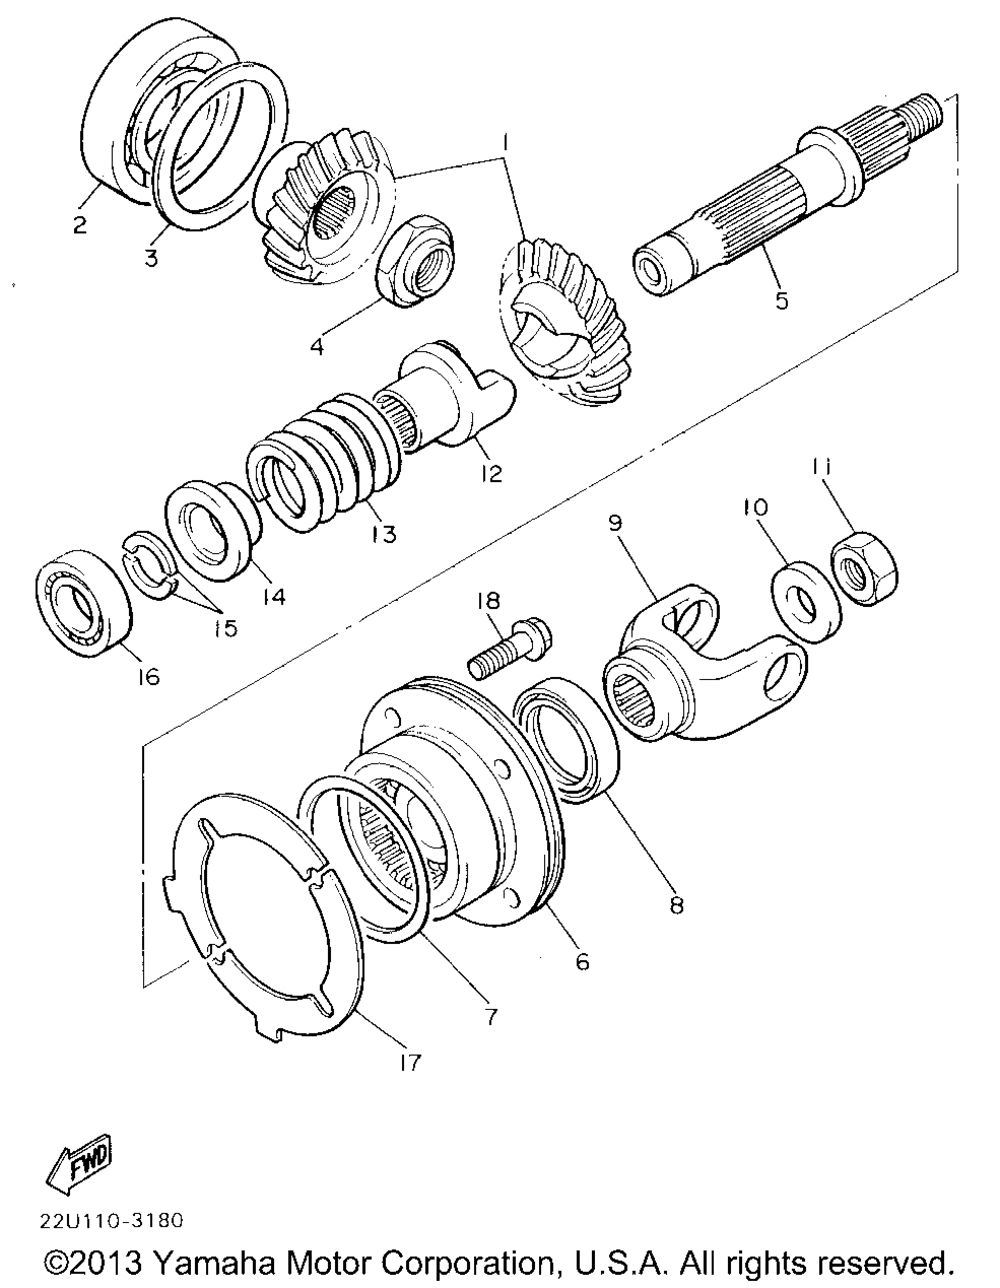 Middle drive gear